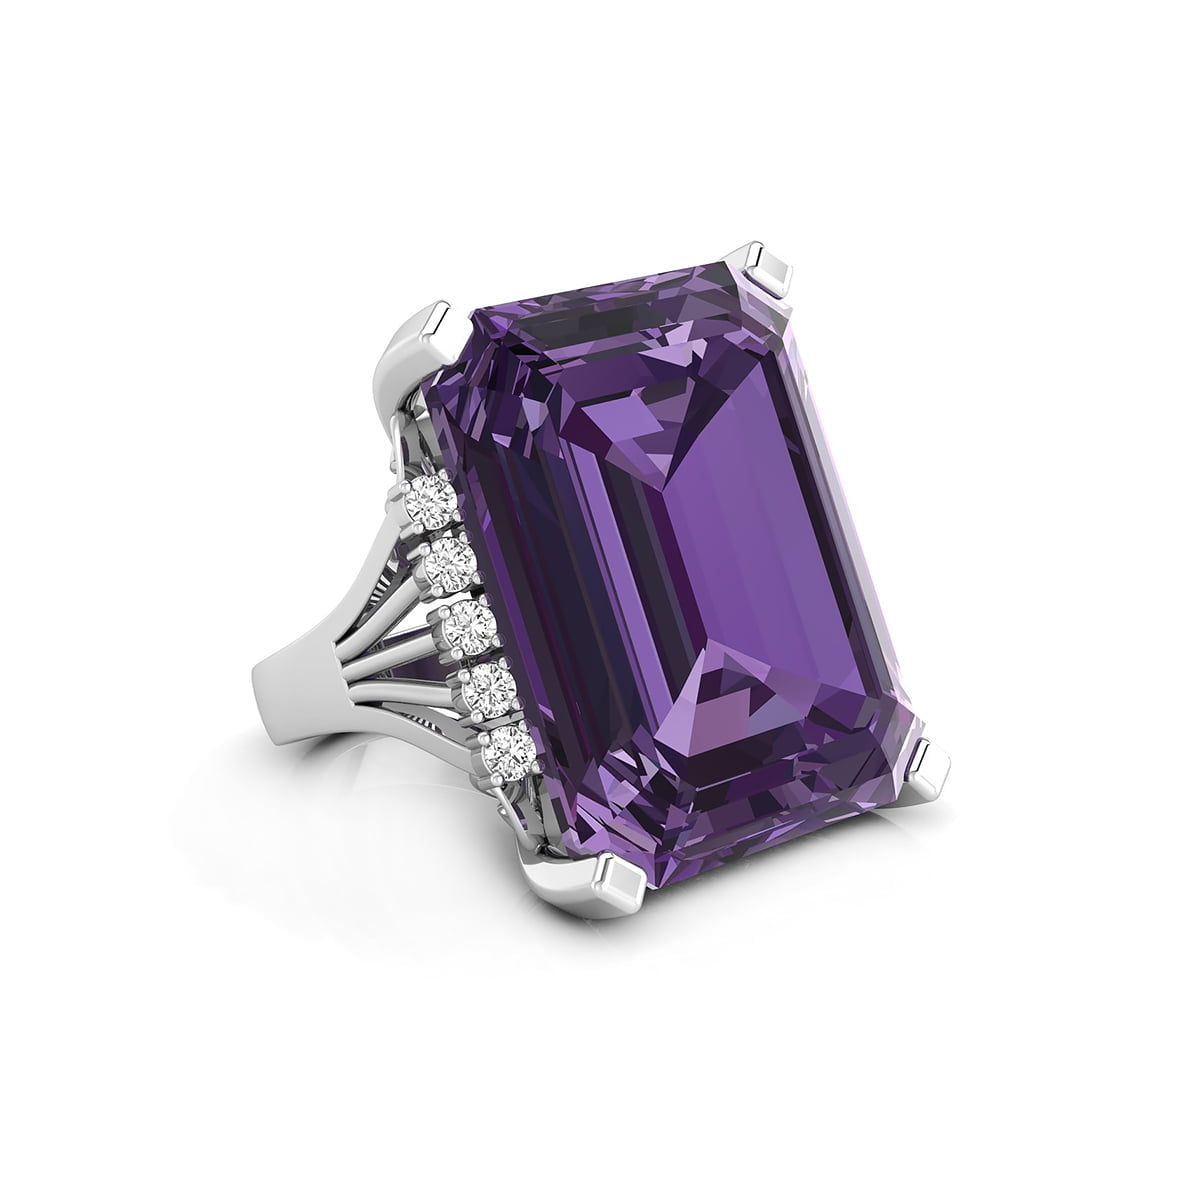 25x21 MM Amethyst Emerald Cut Or Round CZ Stone Cocktail Wedding Ring For Ladies